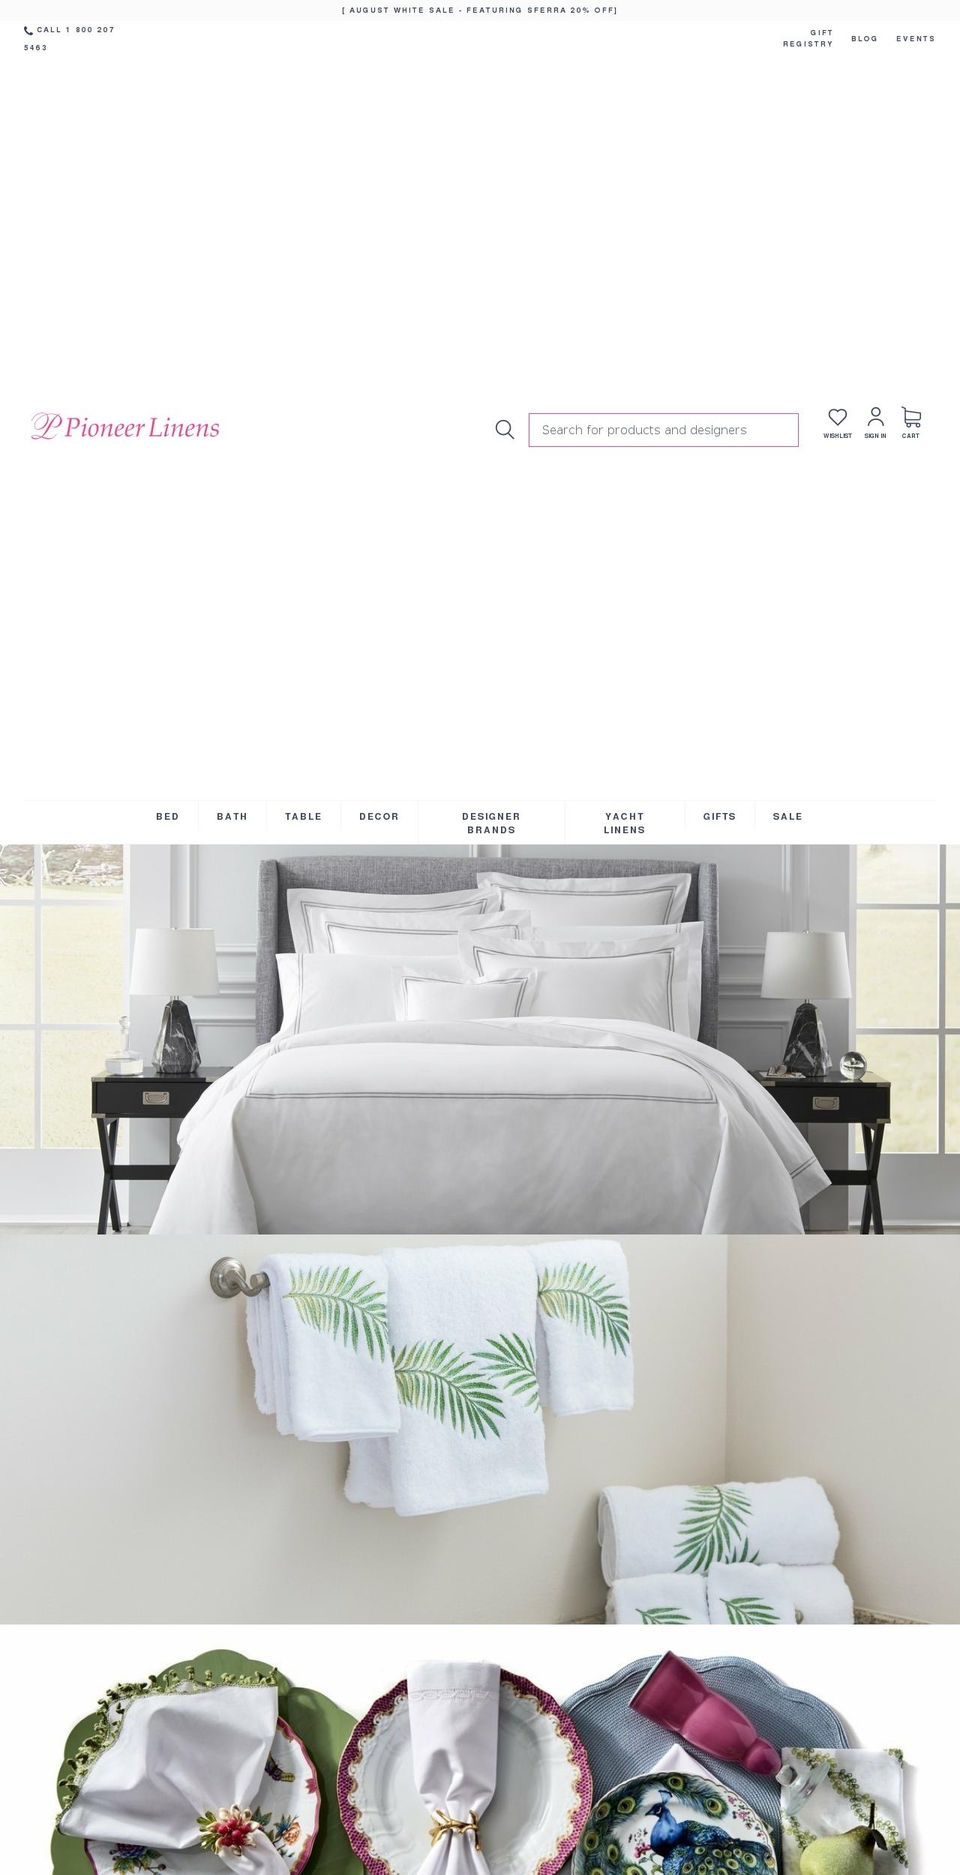 Buko Shopify Theme - Products Consolidation Shopify theme site example yacht-bedding.com